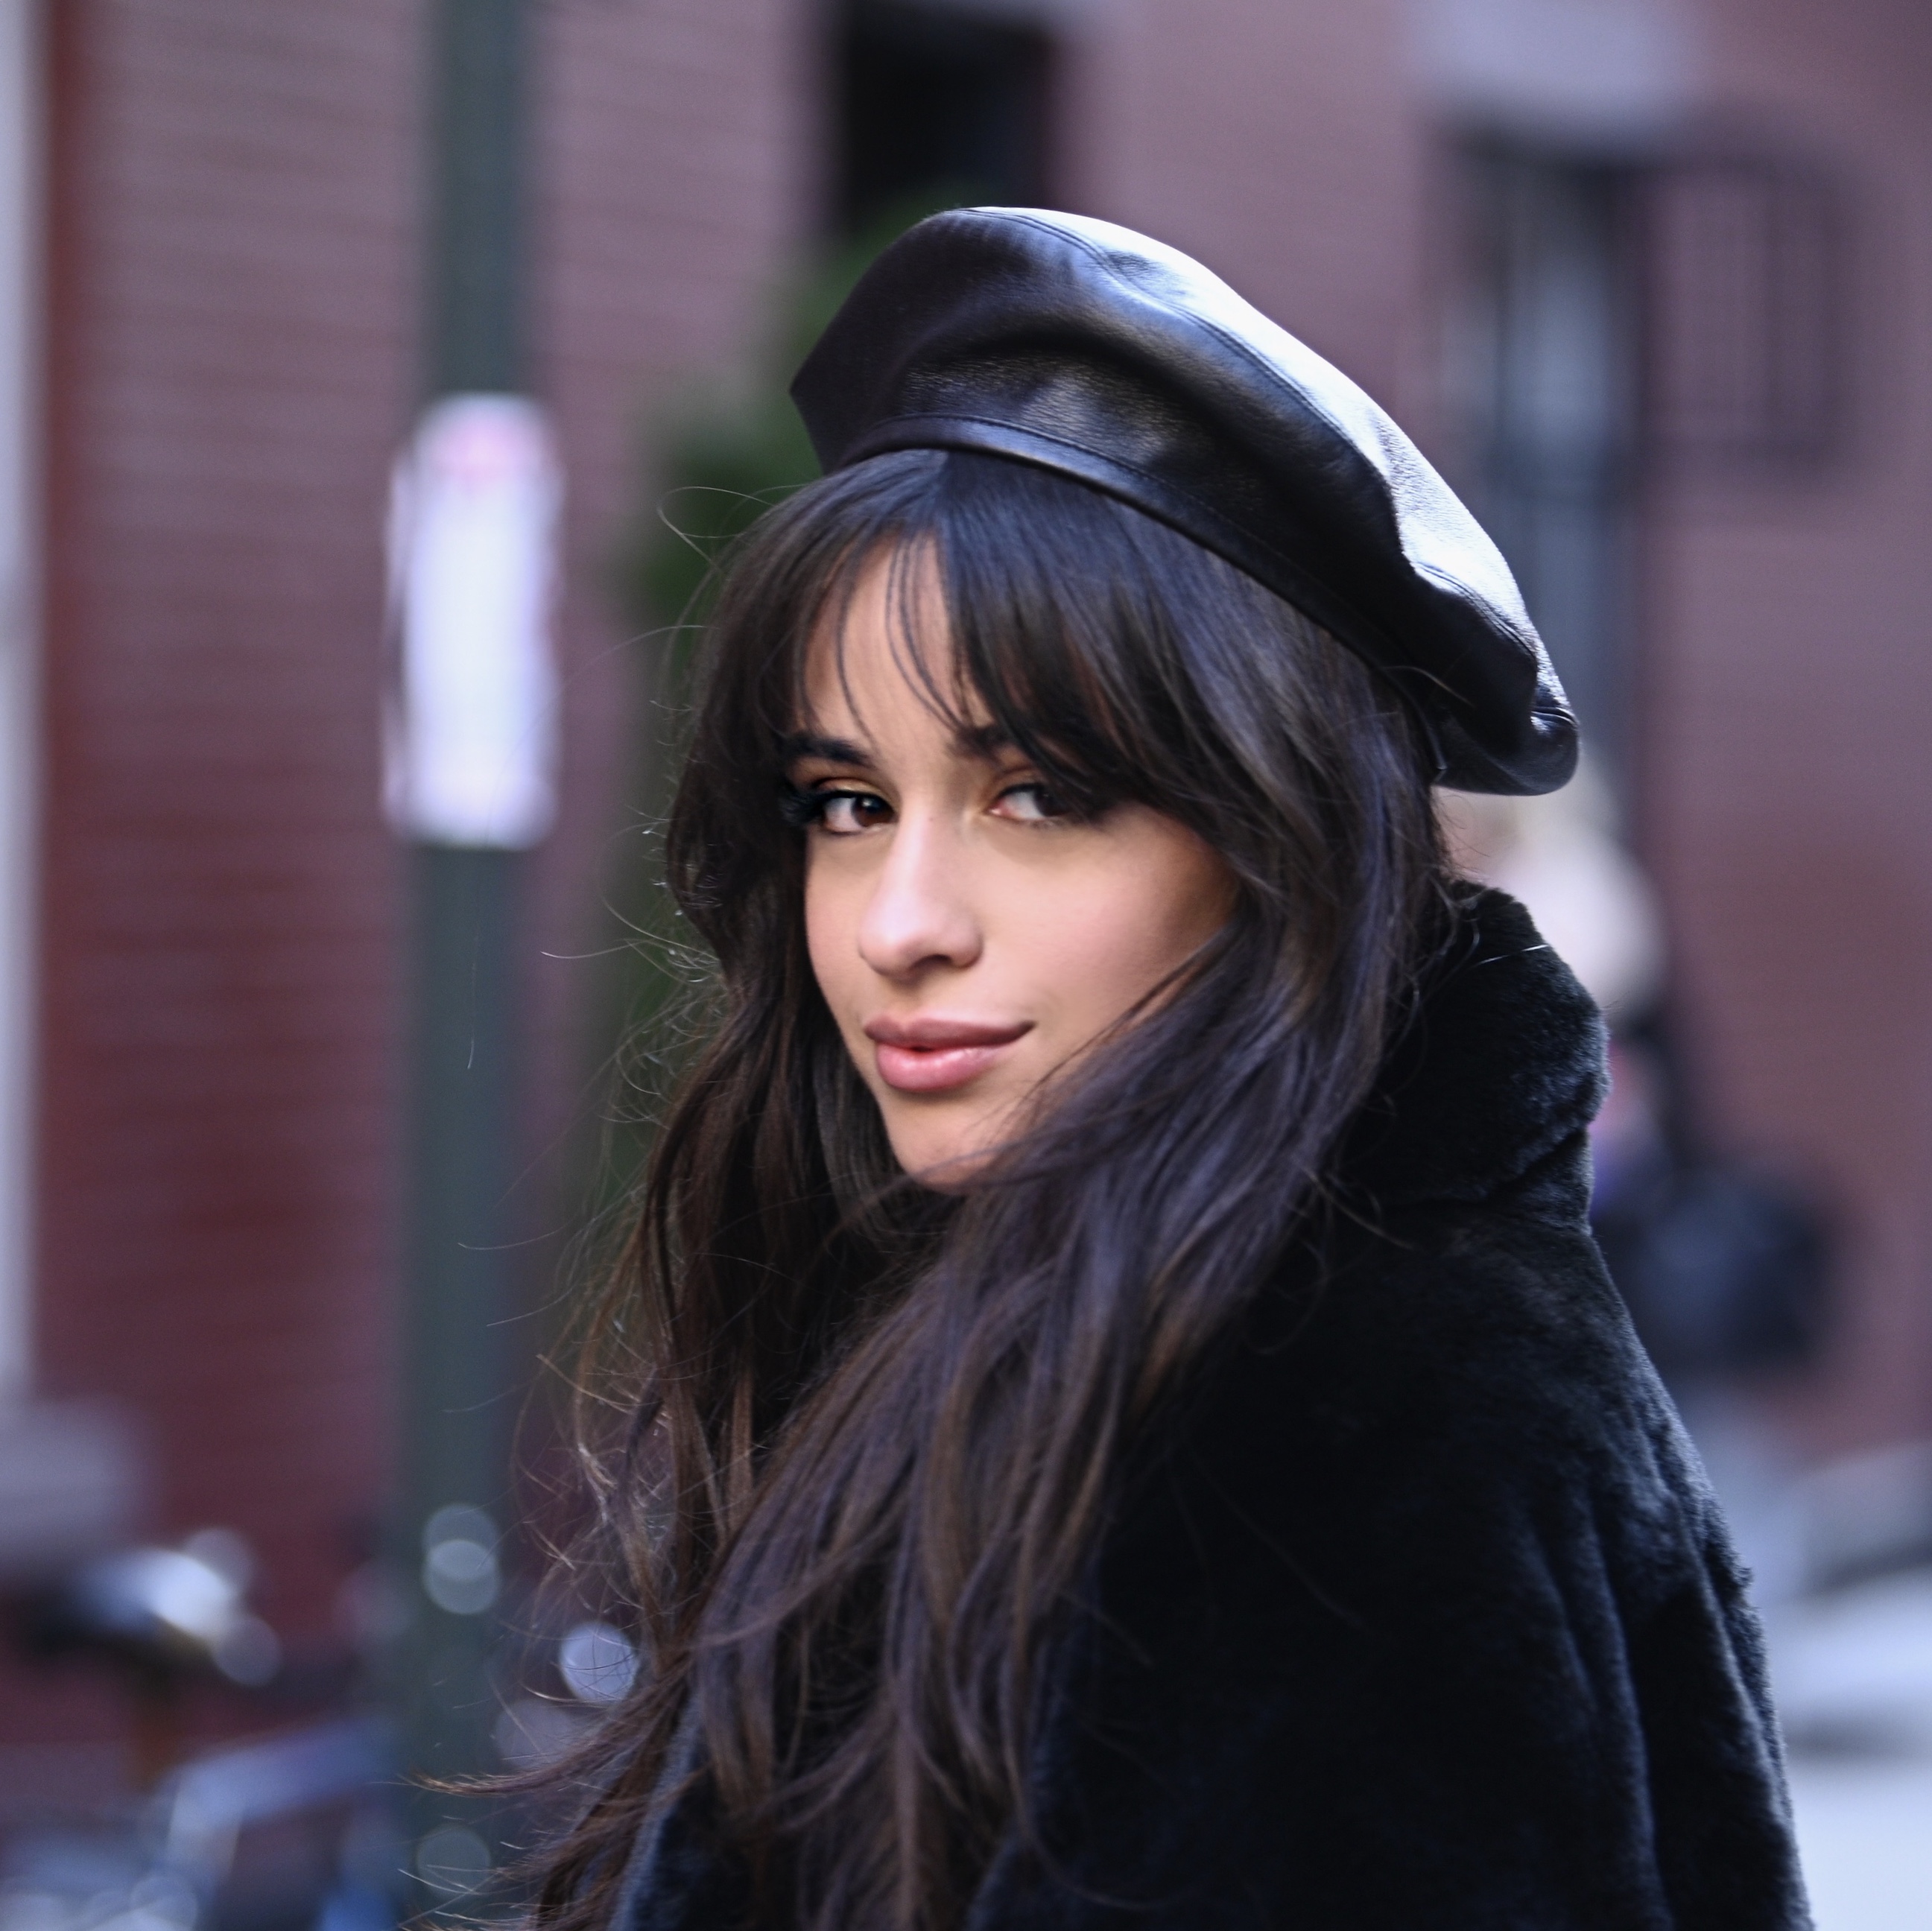 NEW YORK, NY - DECEMBER 06:  Singer Camila Cabello on set filming her new Mastercard ad which will highlight her collaboration and bring to life some of the exclusive experiences cardholders will enjoy.  (Photo by Dave Kotinsky/Getty Images for Mastercard)